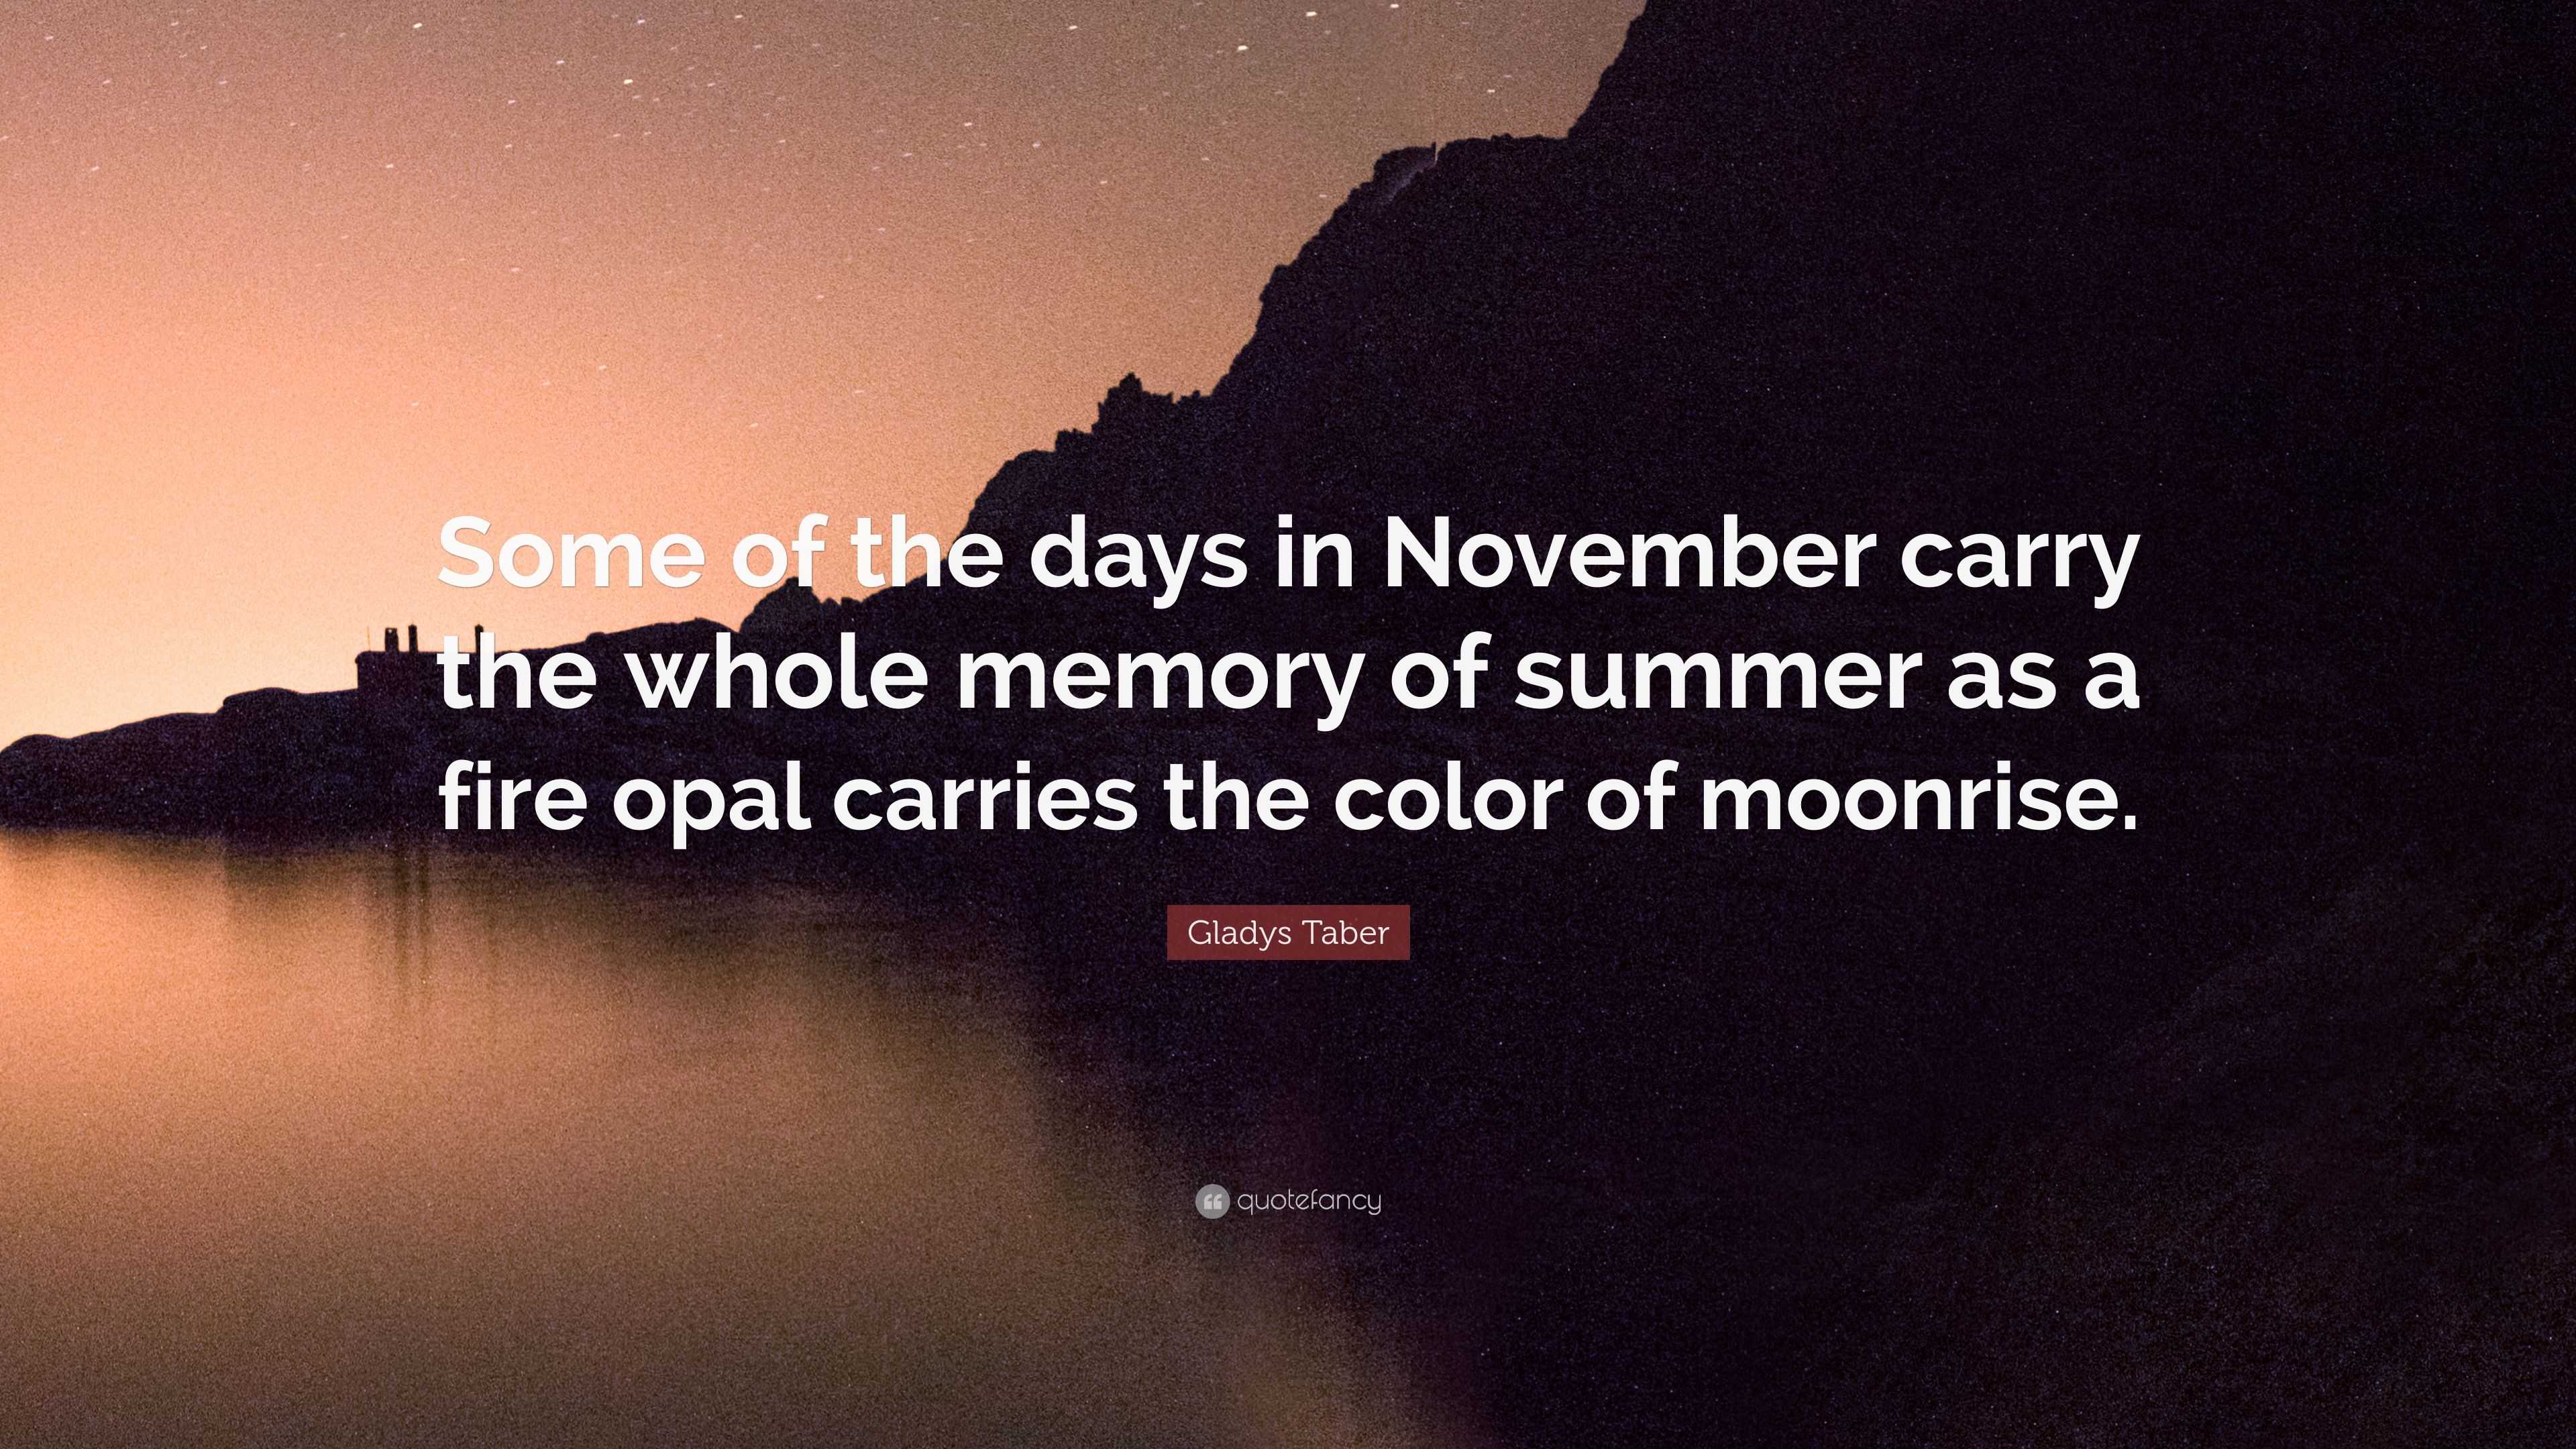 Image result for Some of the days in November carry the whole memory of summer as a fire opal carries the color of moon rise.”